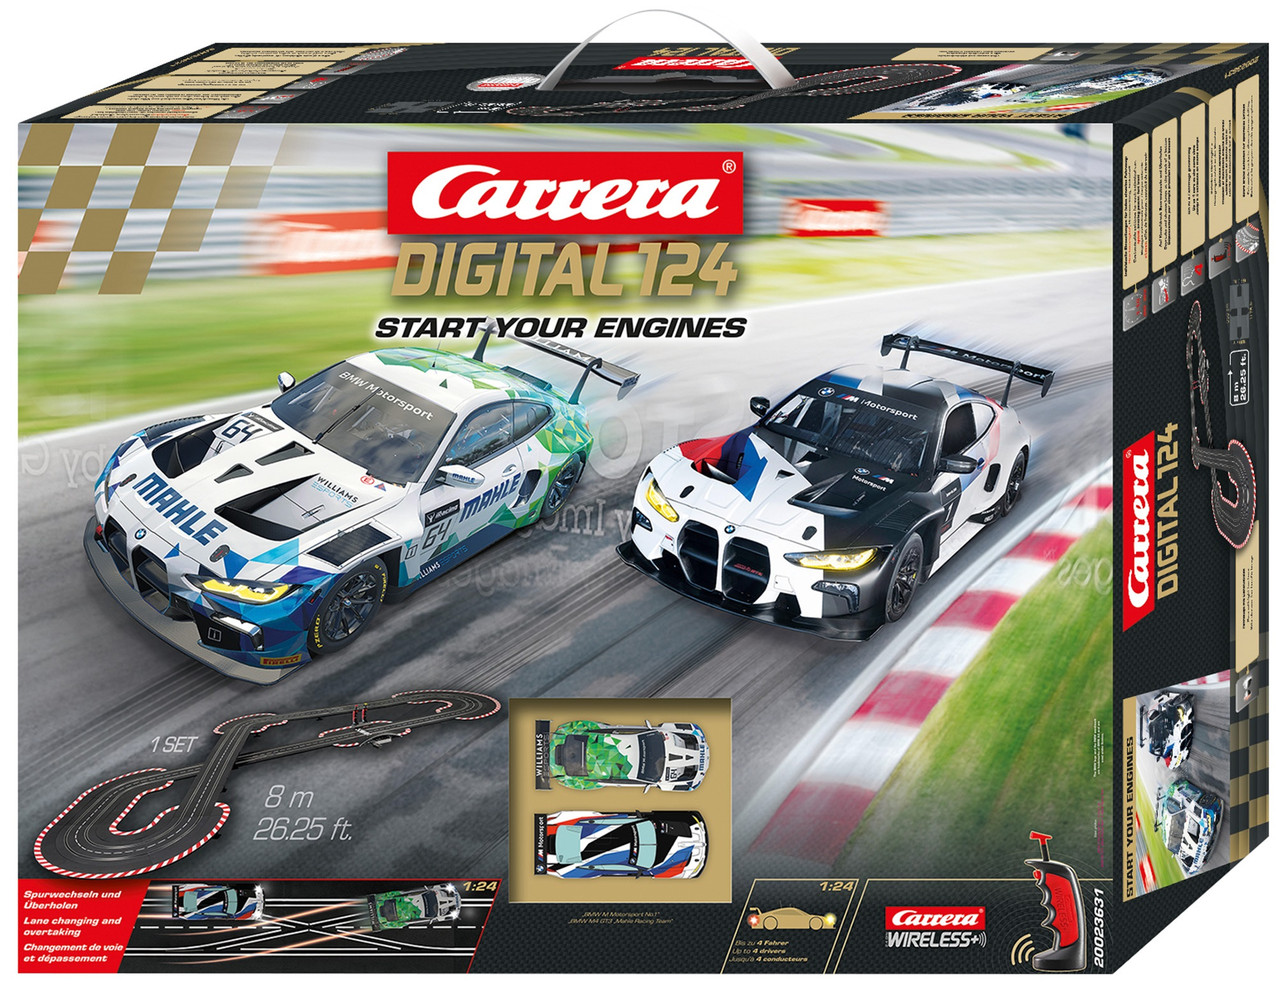 23631 Carrera Digital 124 Start Your Engines - Wireless 1:24 Slot Racing Set  - Great Traditions